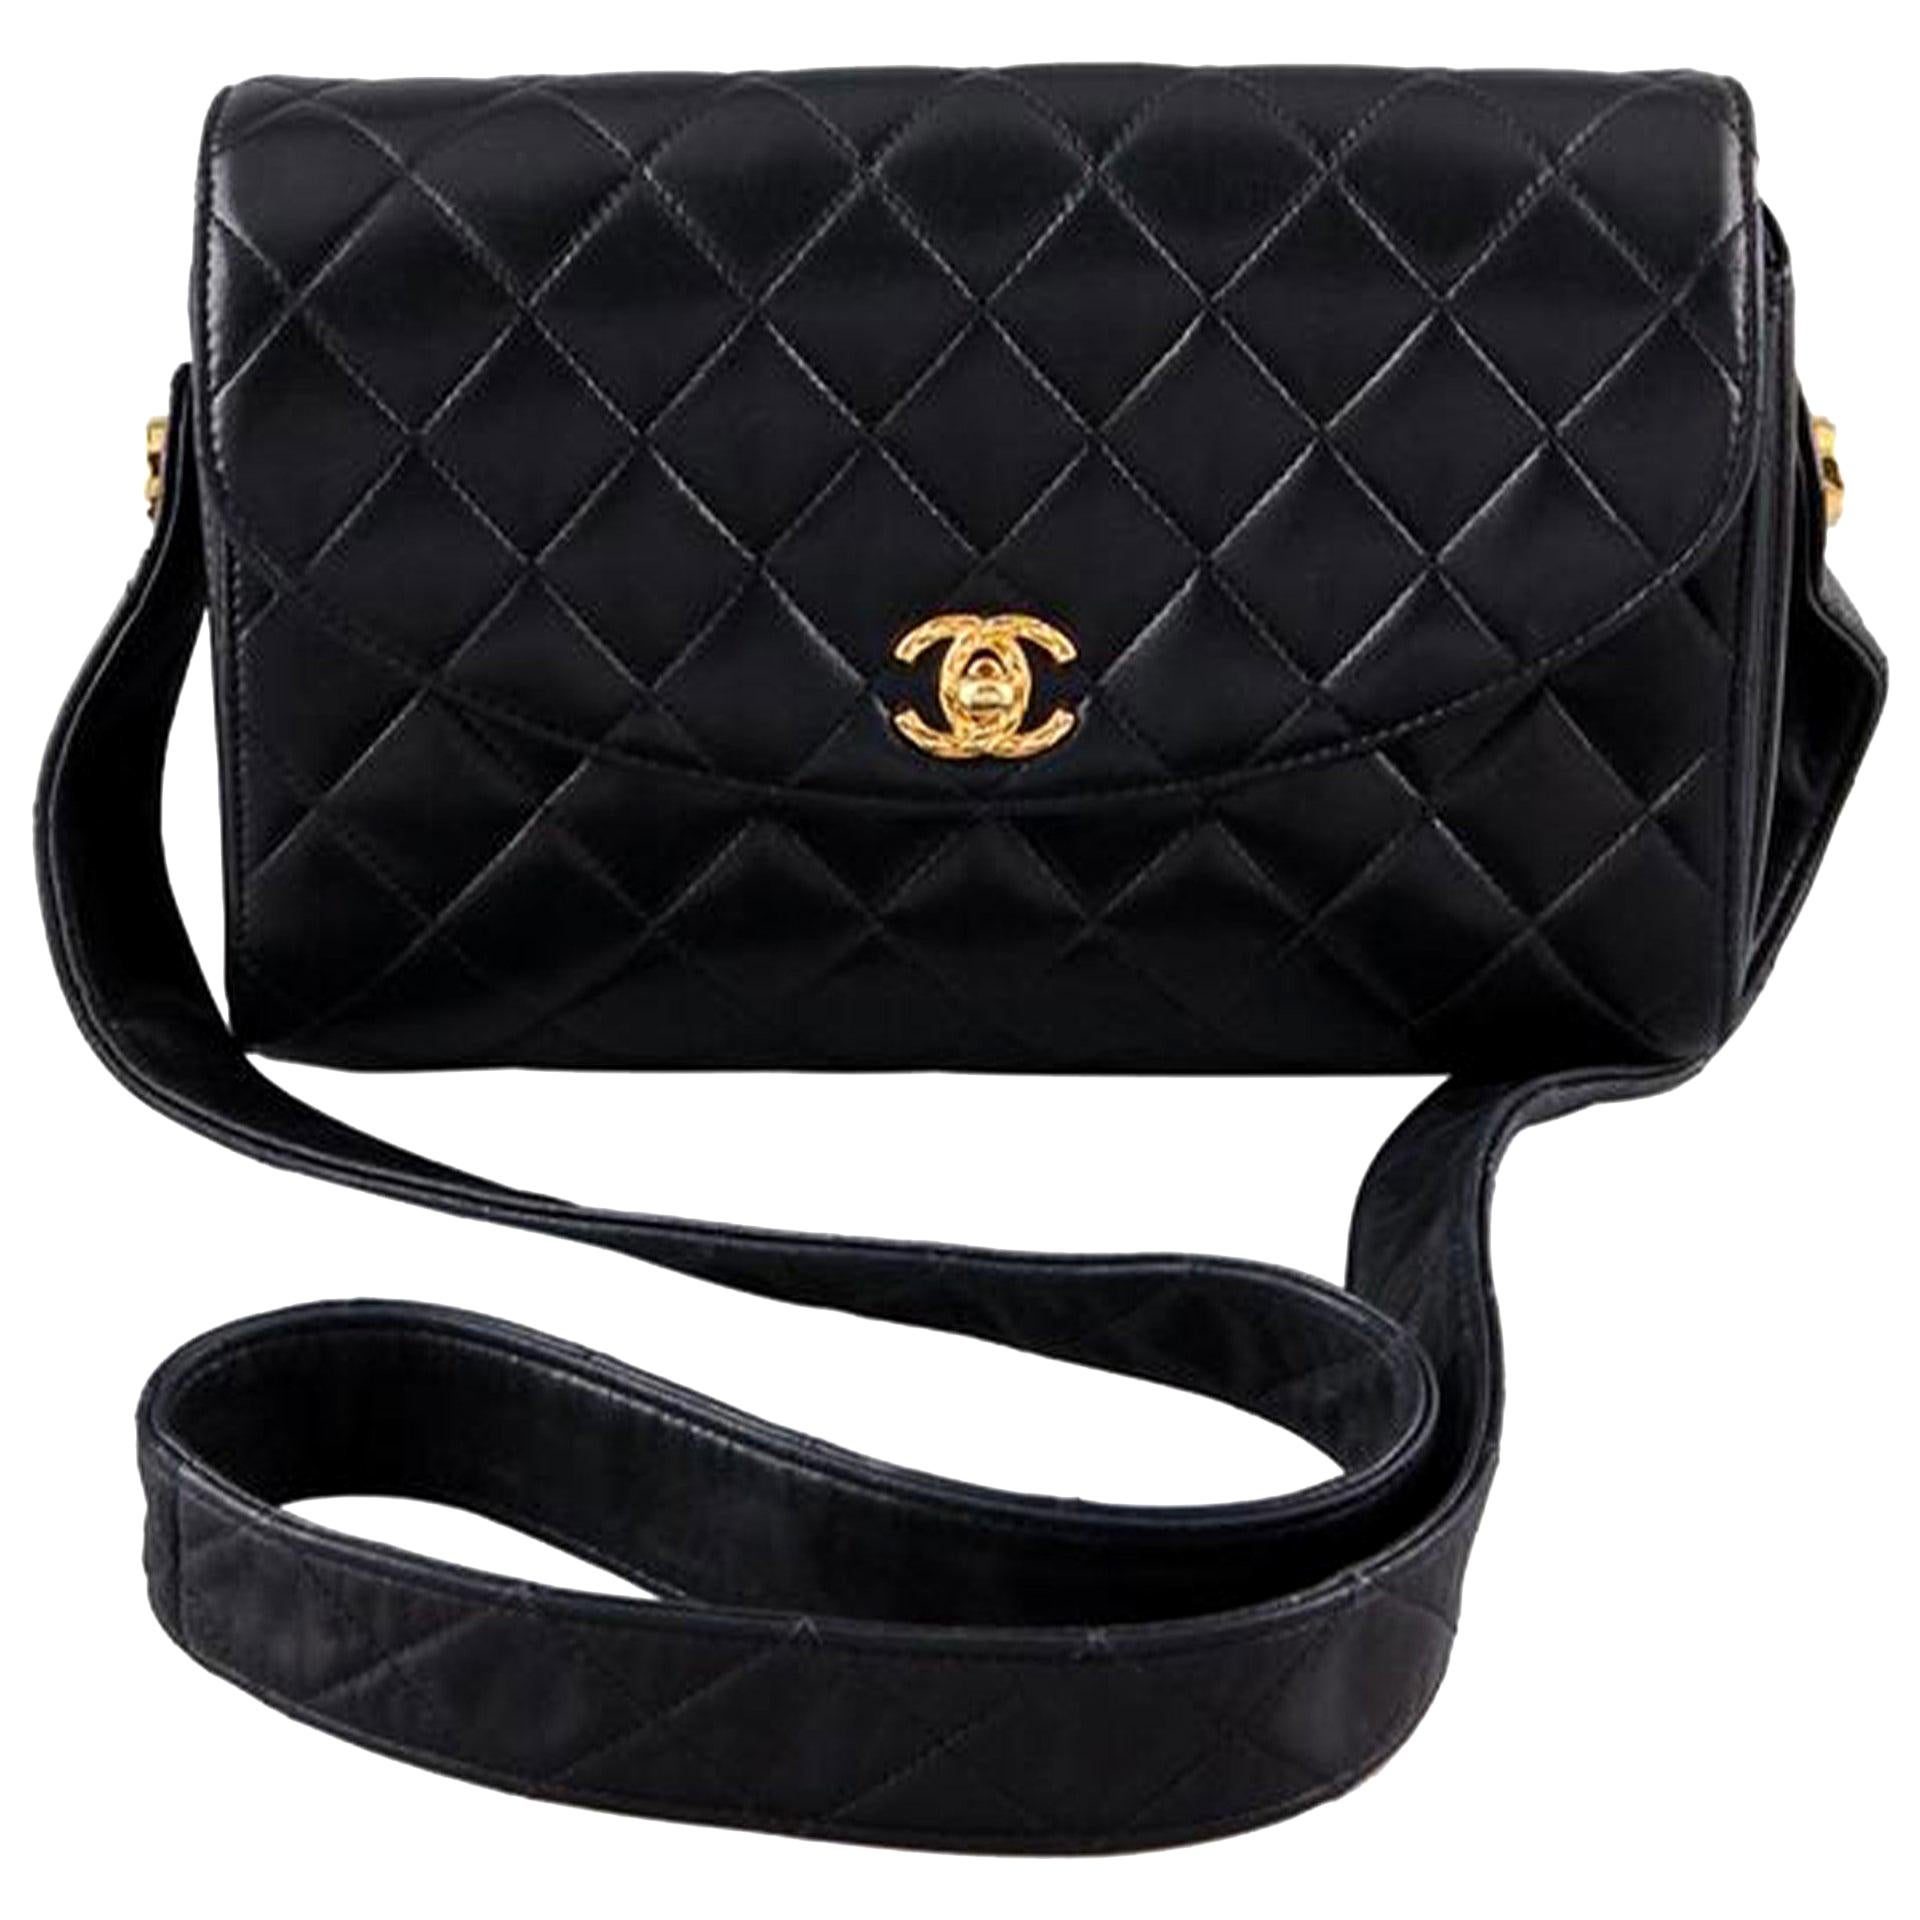 Chanel  Black Quilted Leather Classic Flap Jumbo Shoulder Bag  VSP  Consignment